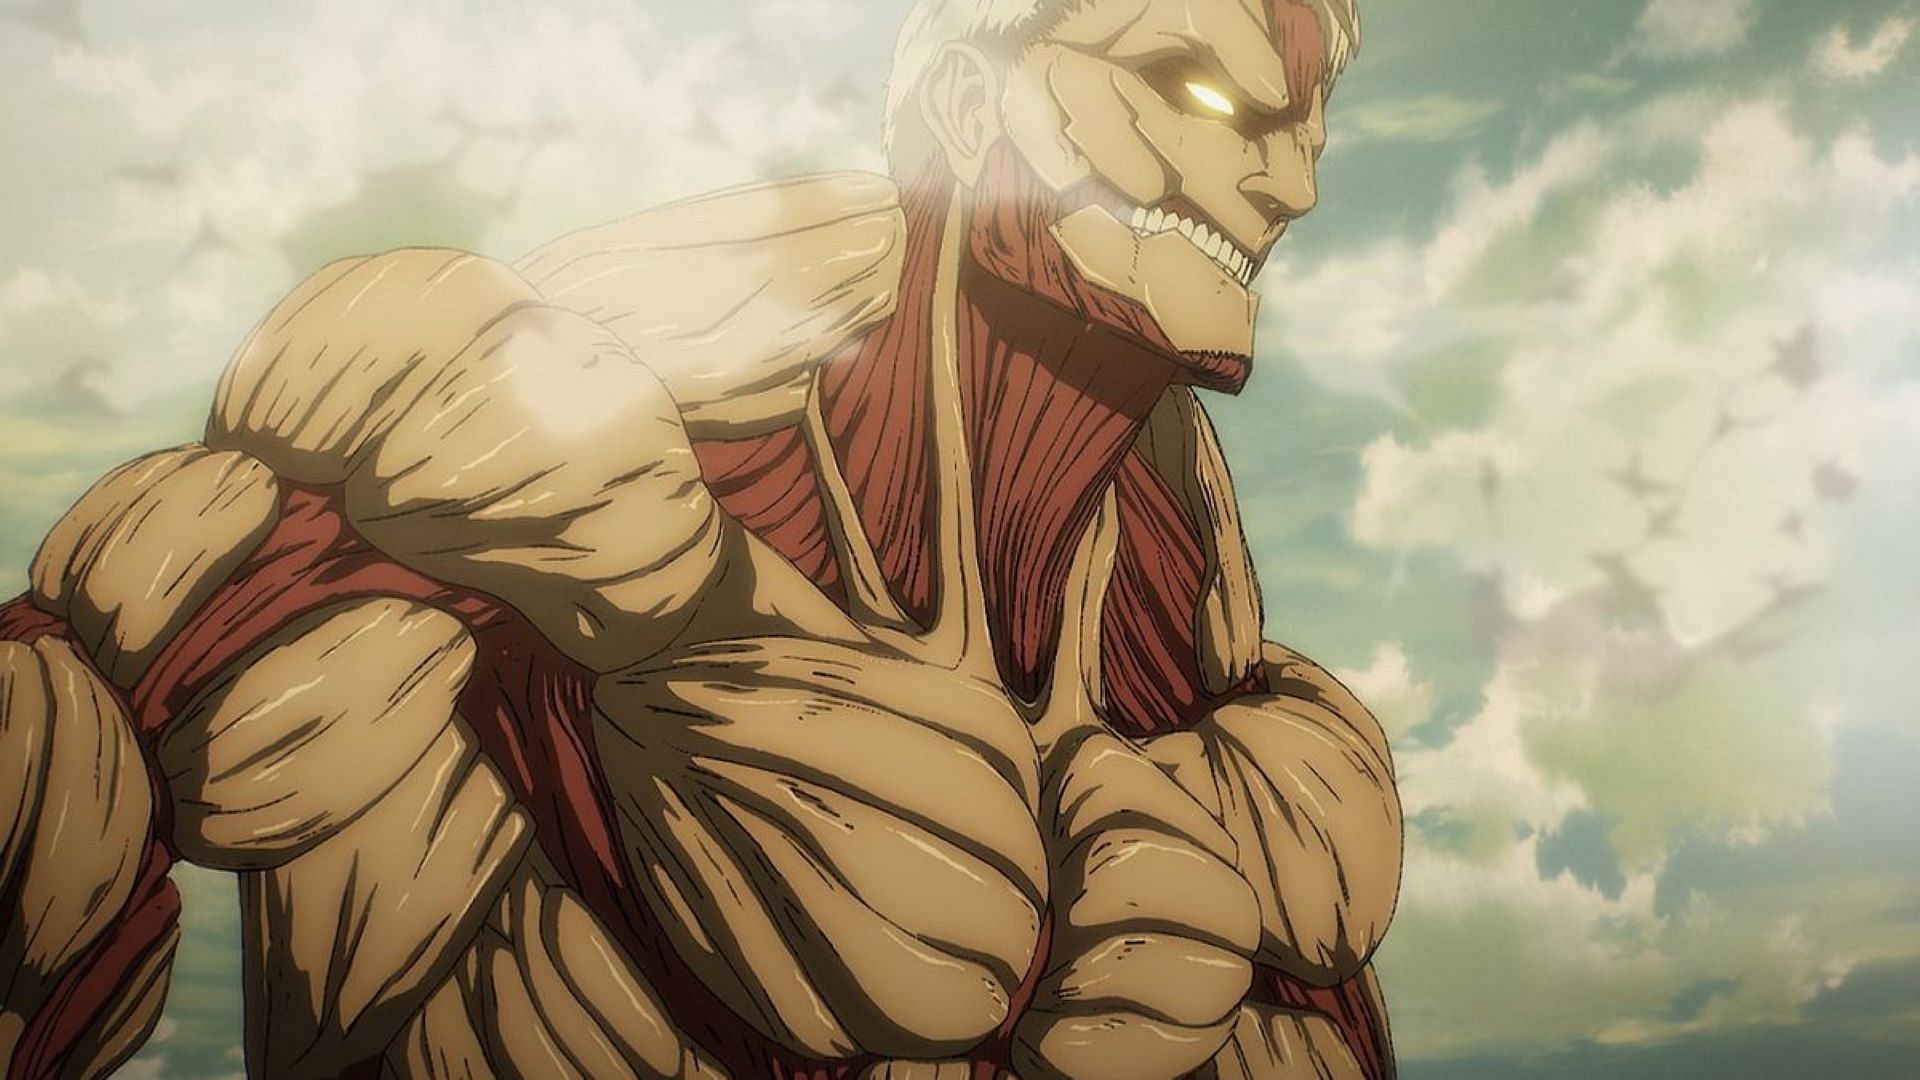 Attack on Titan anime reveals new promotional image for its final season